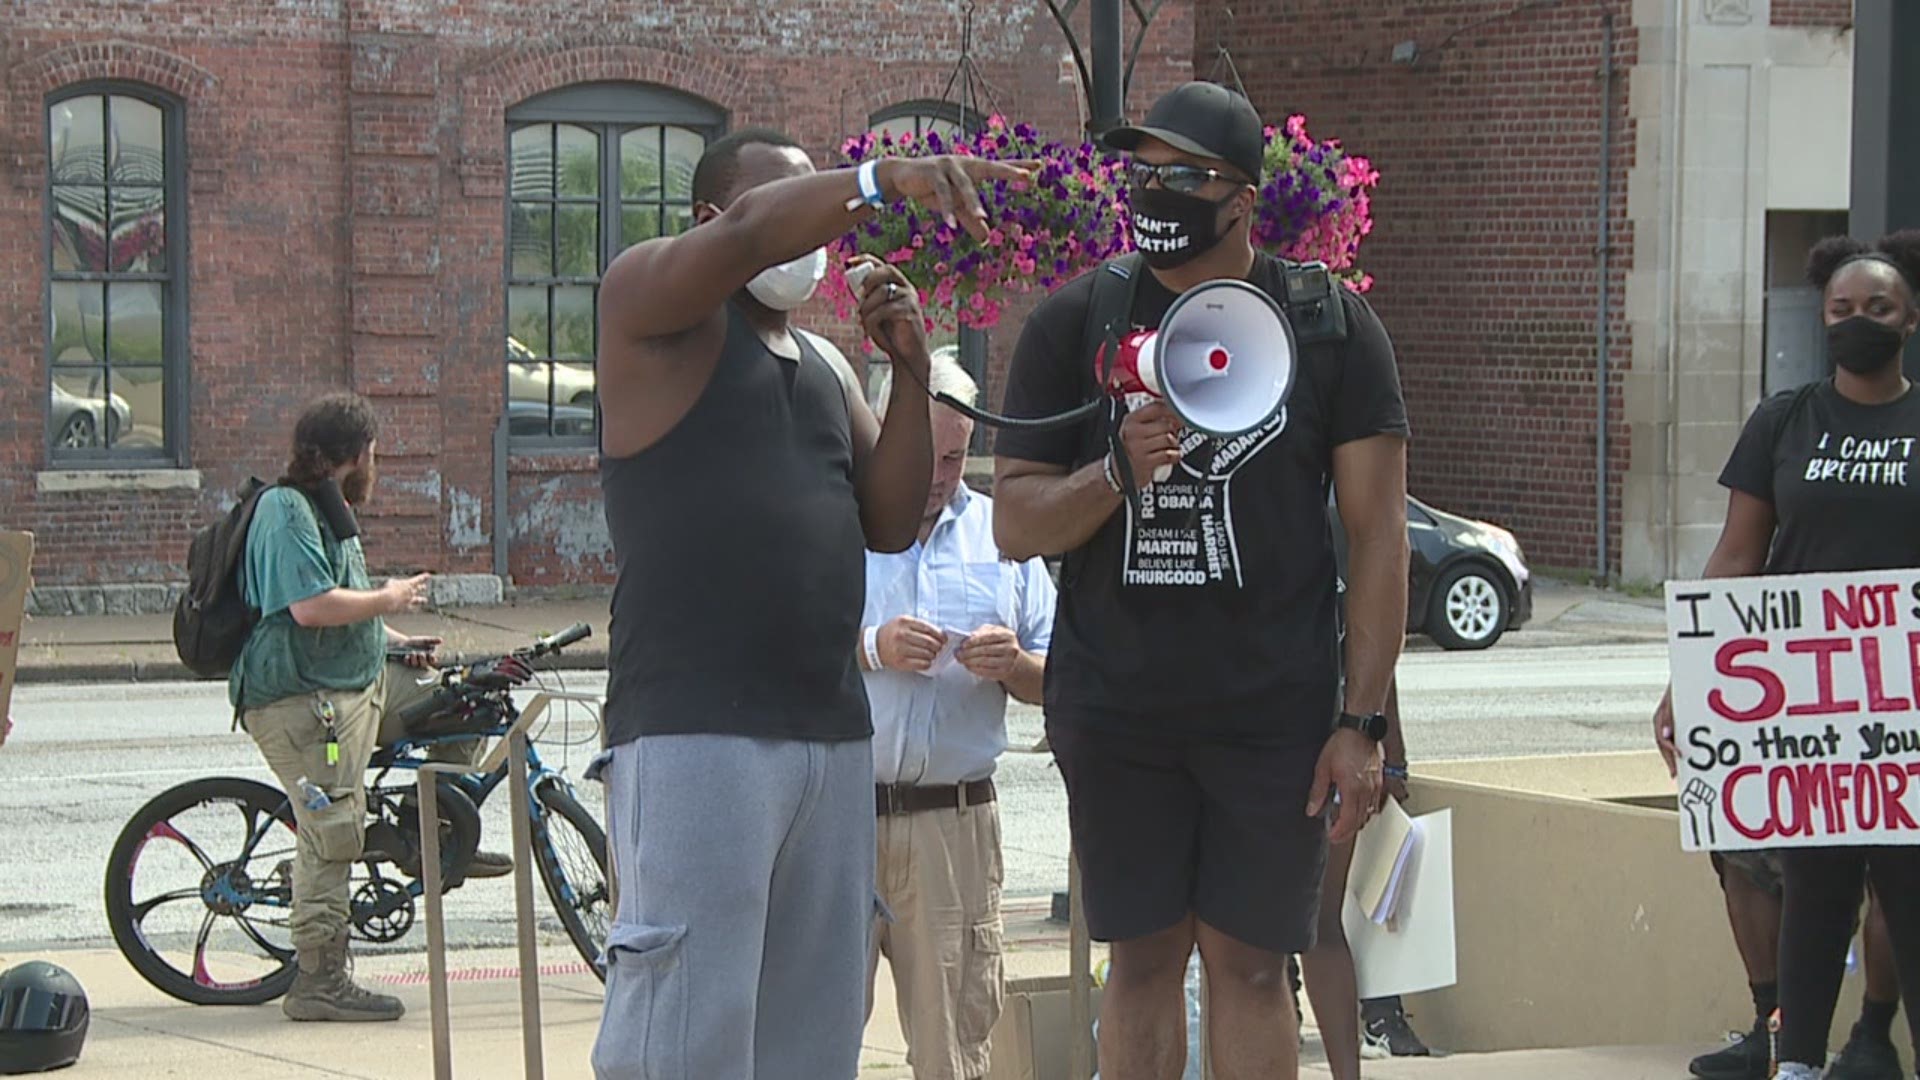 Dozens gathered outside the Davenport Police Department to protest against the use of excessive force.